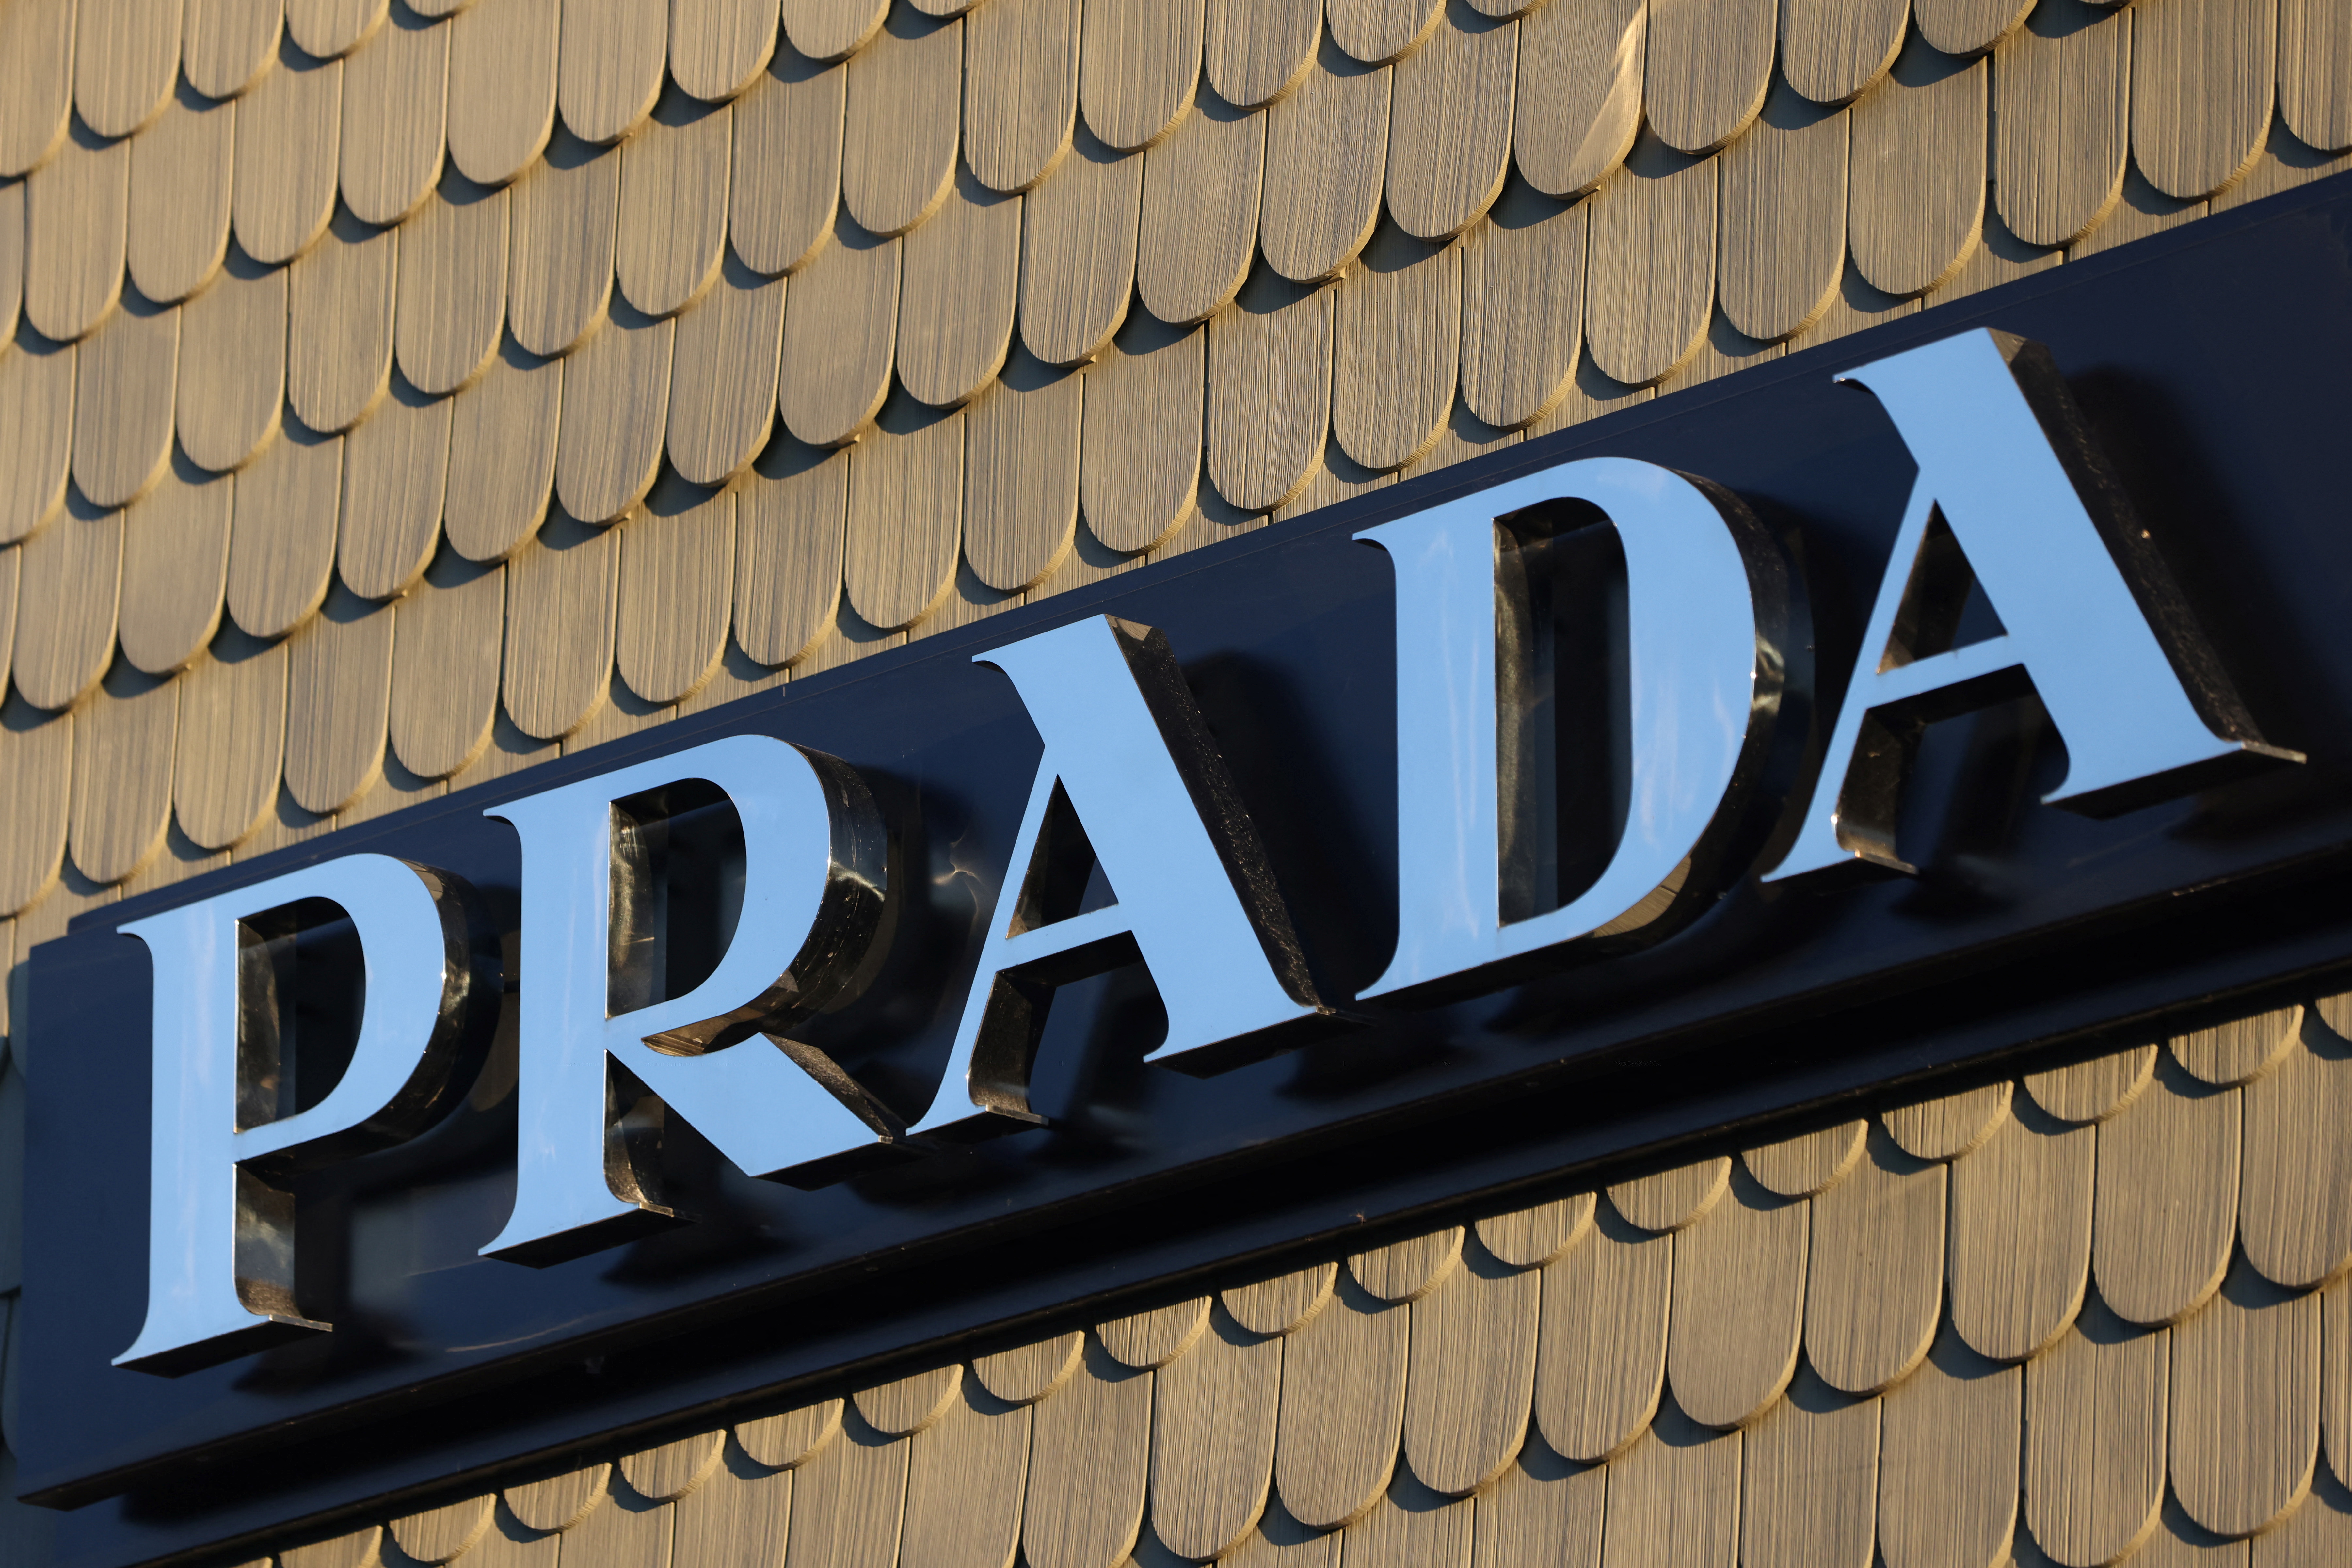 Prada sales rise 22% in first half, beating expectations | Reuters